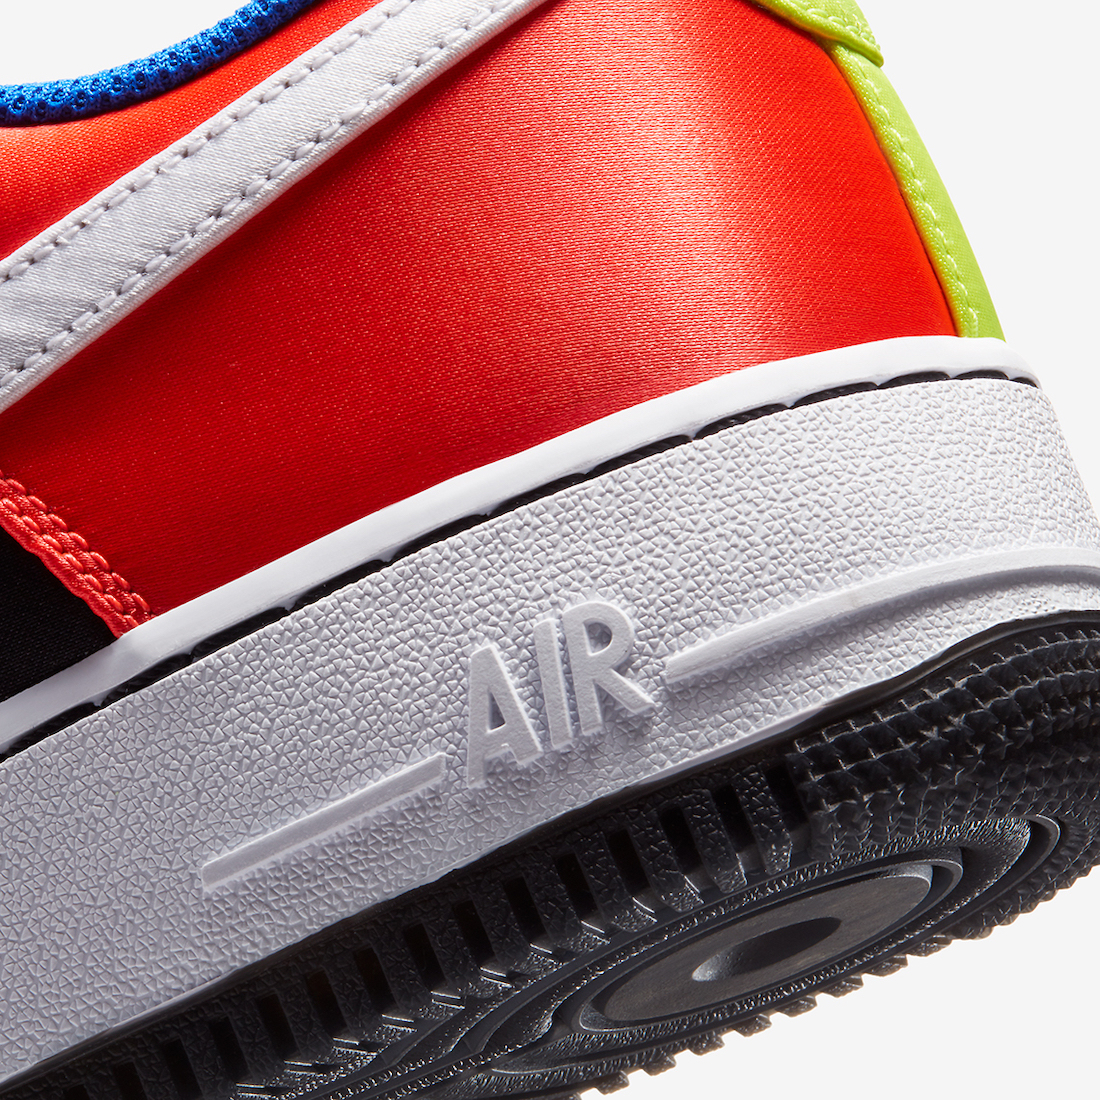 Nike Air Force 1 Low Olympic 2020 DA1345-014 Release Date